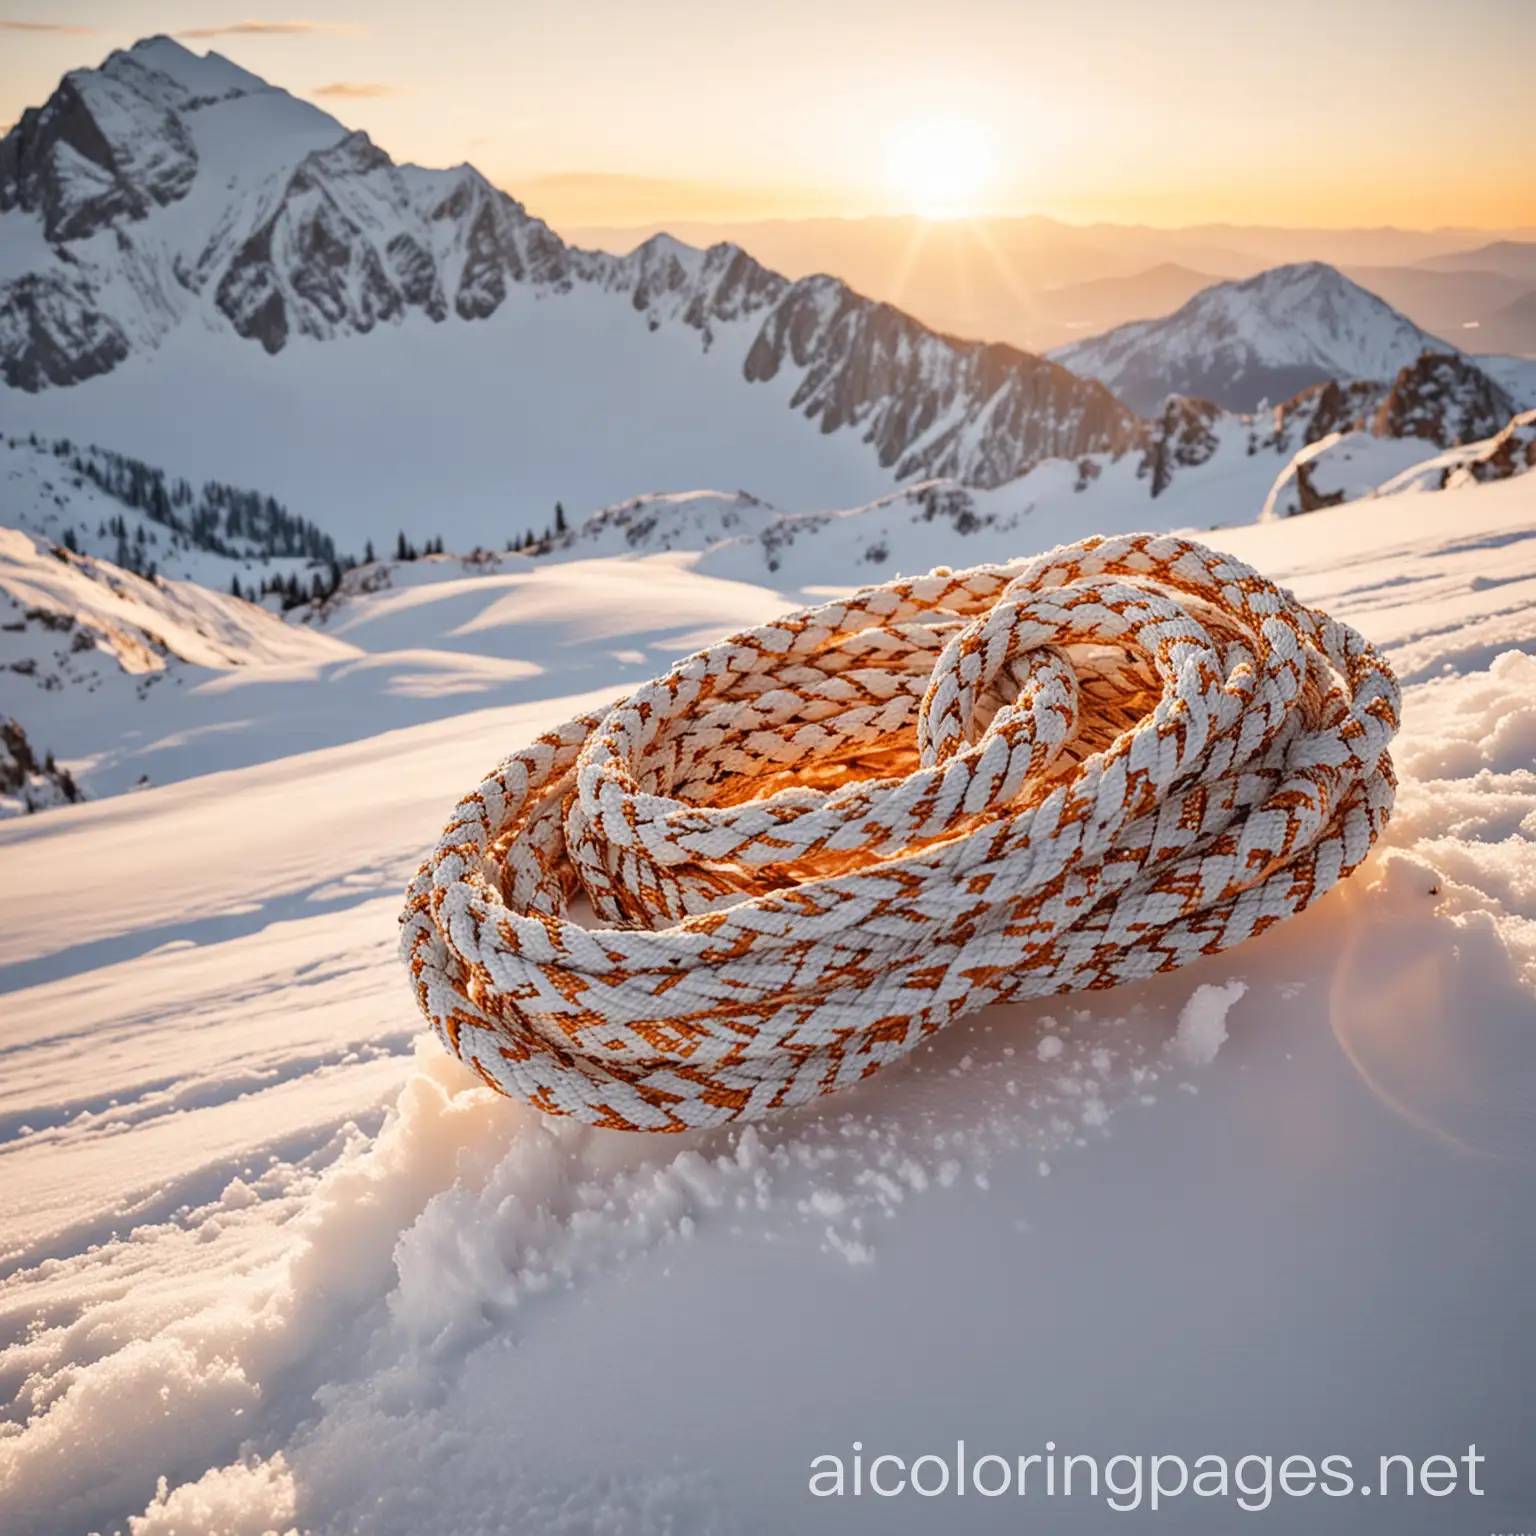 Close-up shot of a pair of ski ropes coiled neatly on a snow-covered mountain peak at dawn, with soft golden light casting a warm glow. The ropes are wrapped around each other in a crisscross pattern, their textured surface and rusty hue standing out against the crisp white backdrop., Coloring Page, black and white, line art, white background, Simplicity, Ample White Space. The background of the coloring page is plain white to make it easy for young children to color within the lines. The outlines of all the subjects are easy to distinguish, making it simple for kids to color without too much difficulty